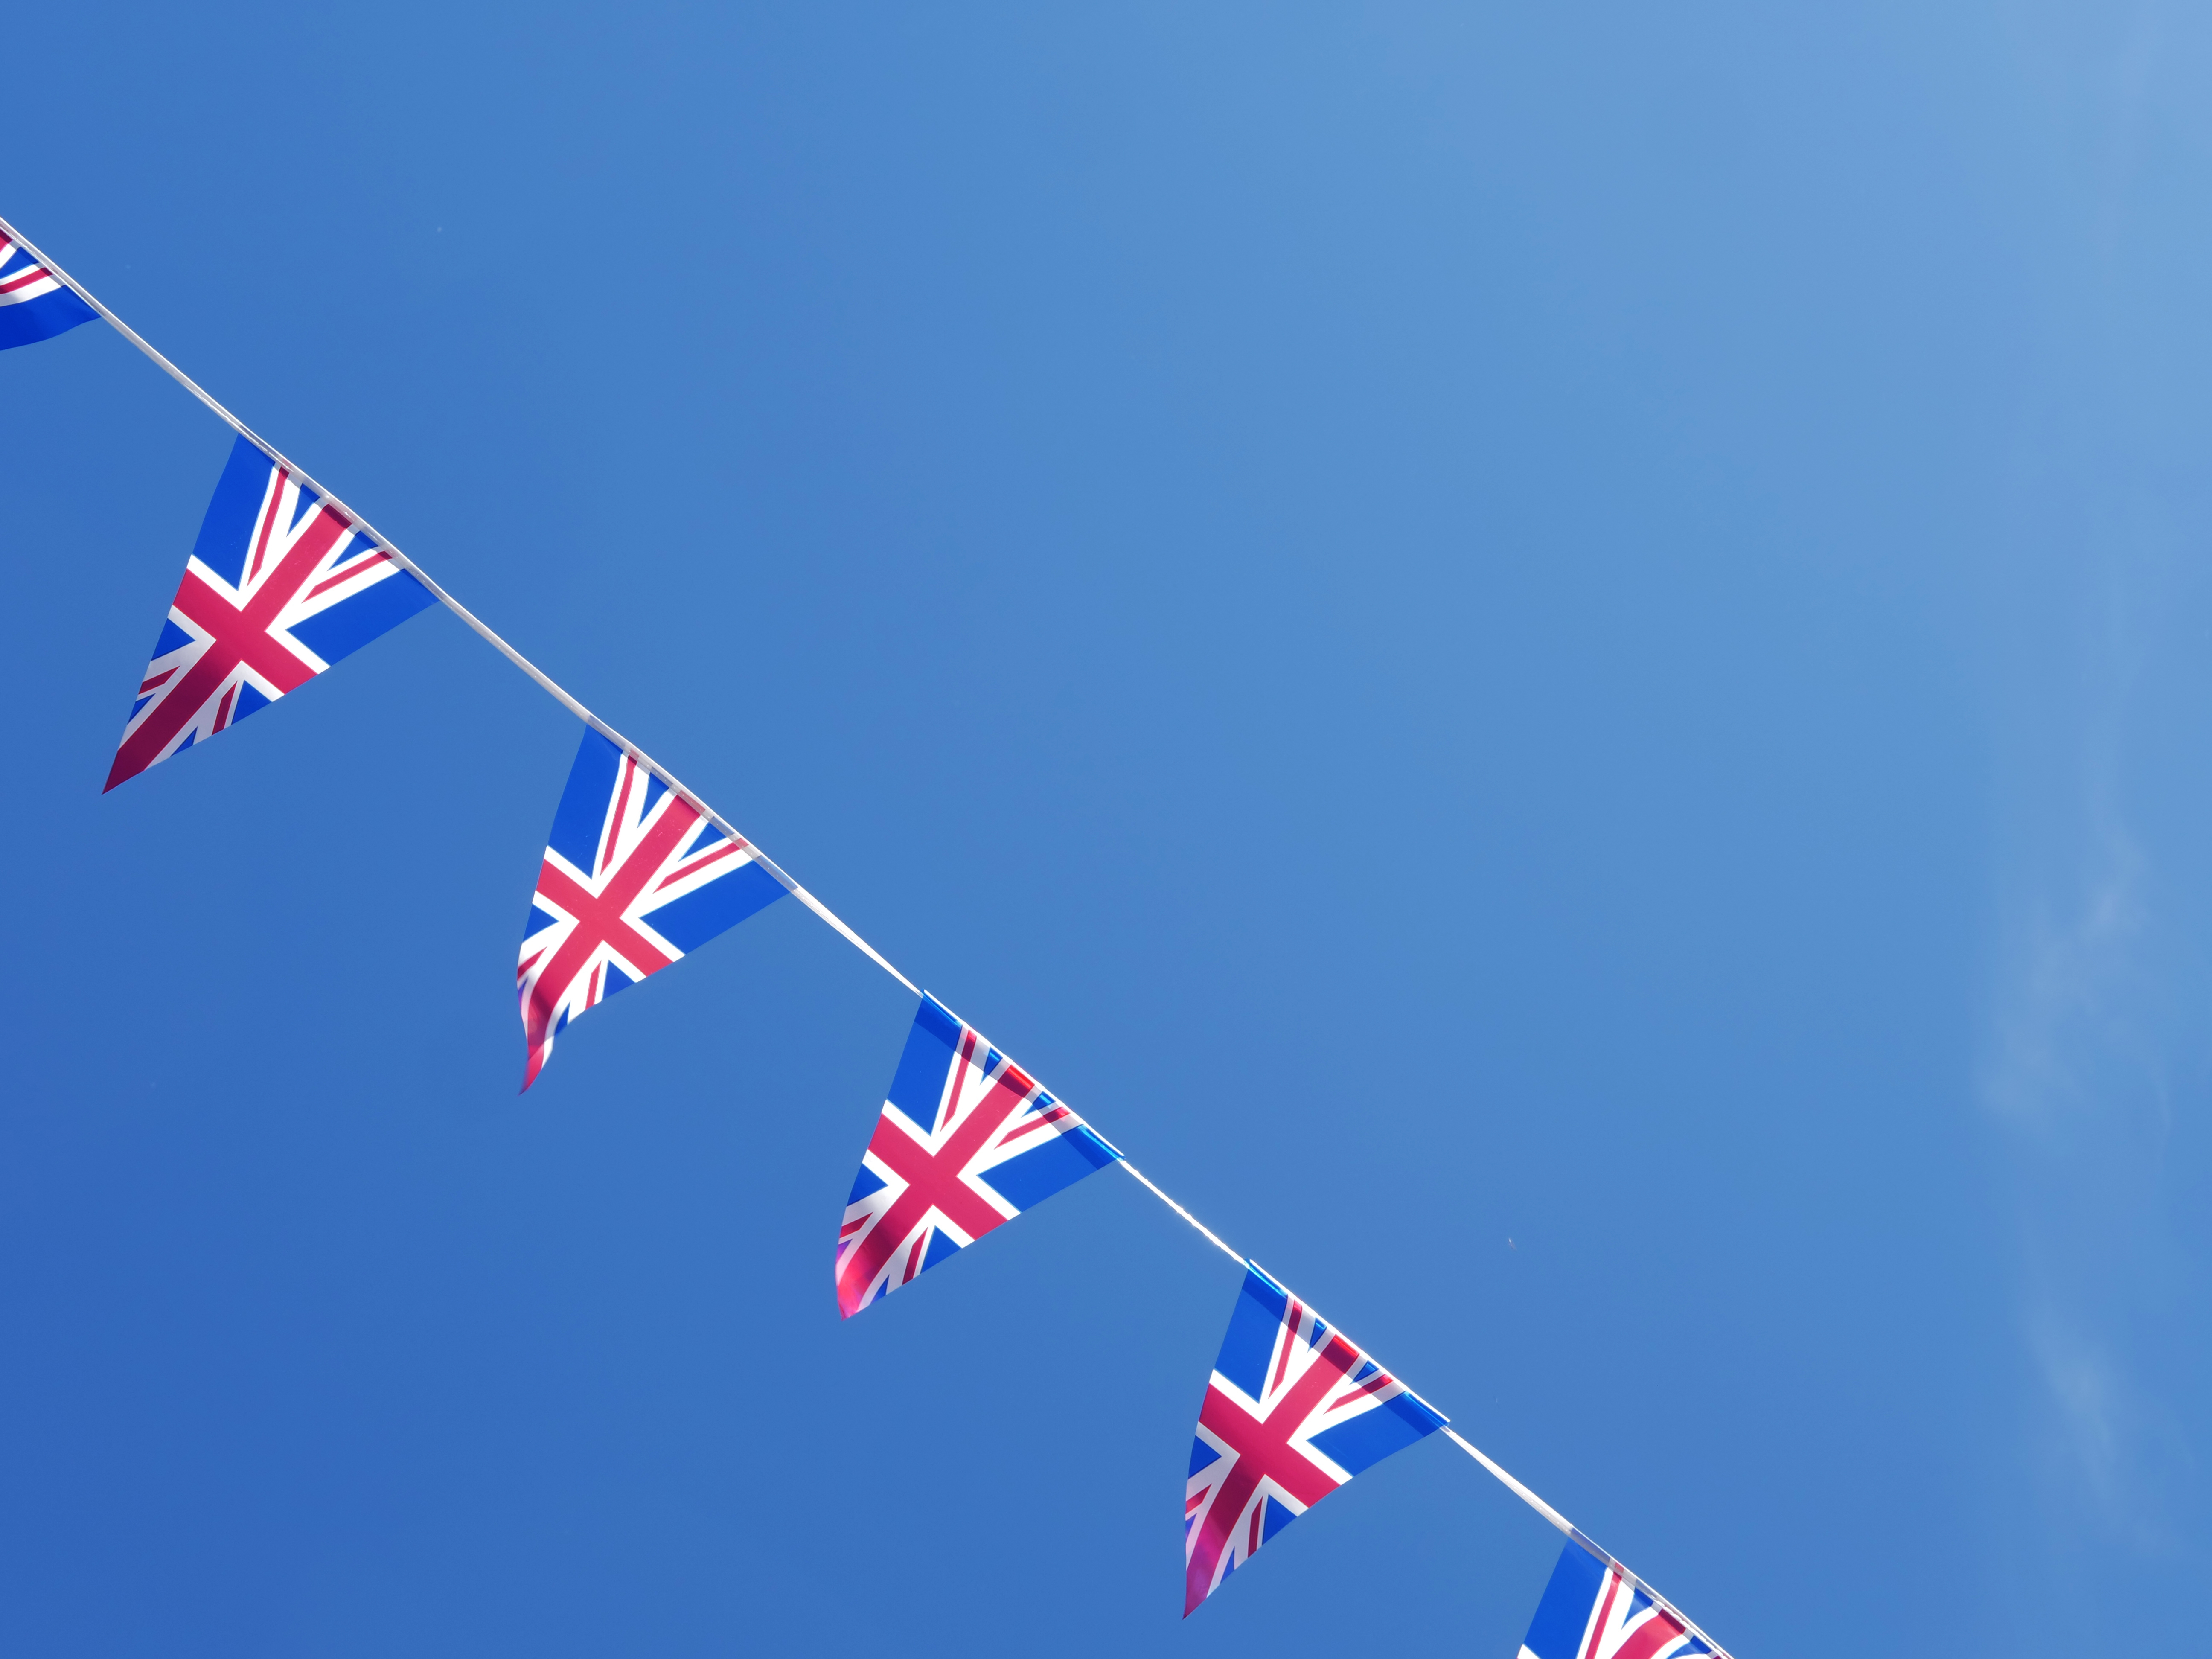 Union Jack Bunting against a blue sky